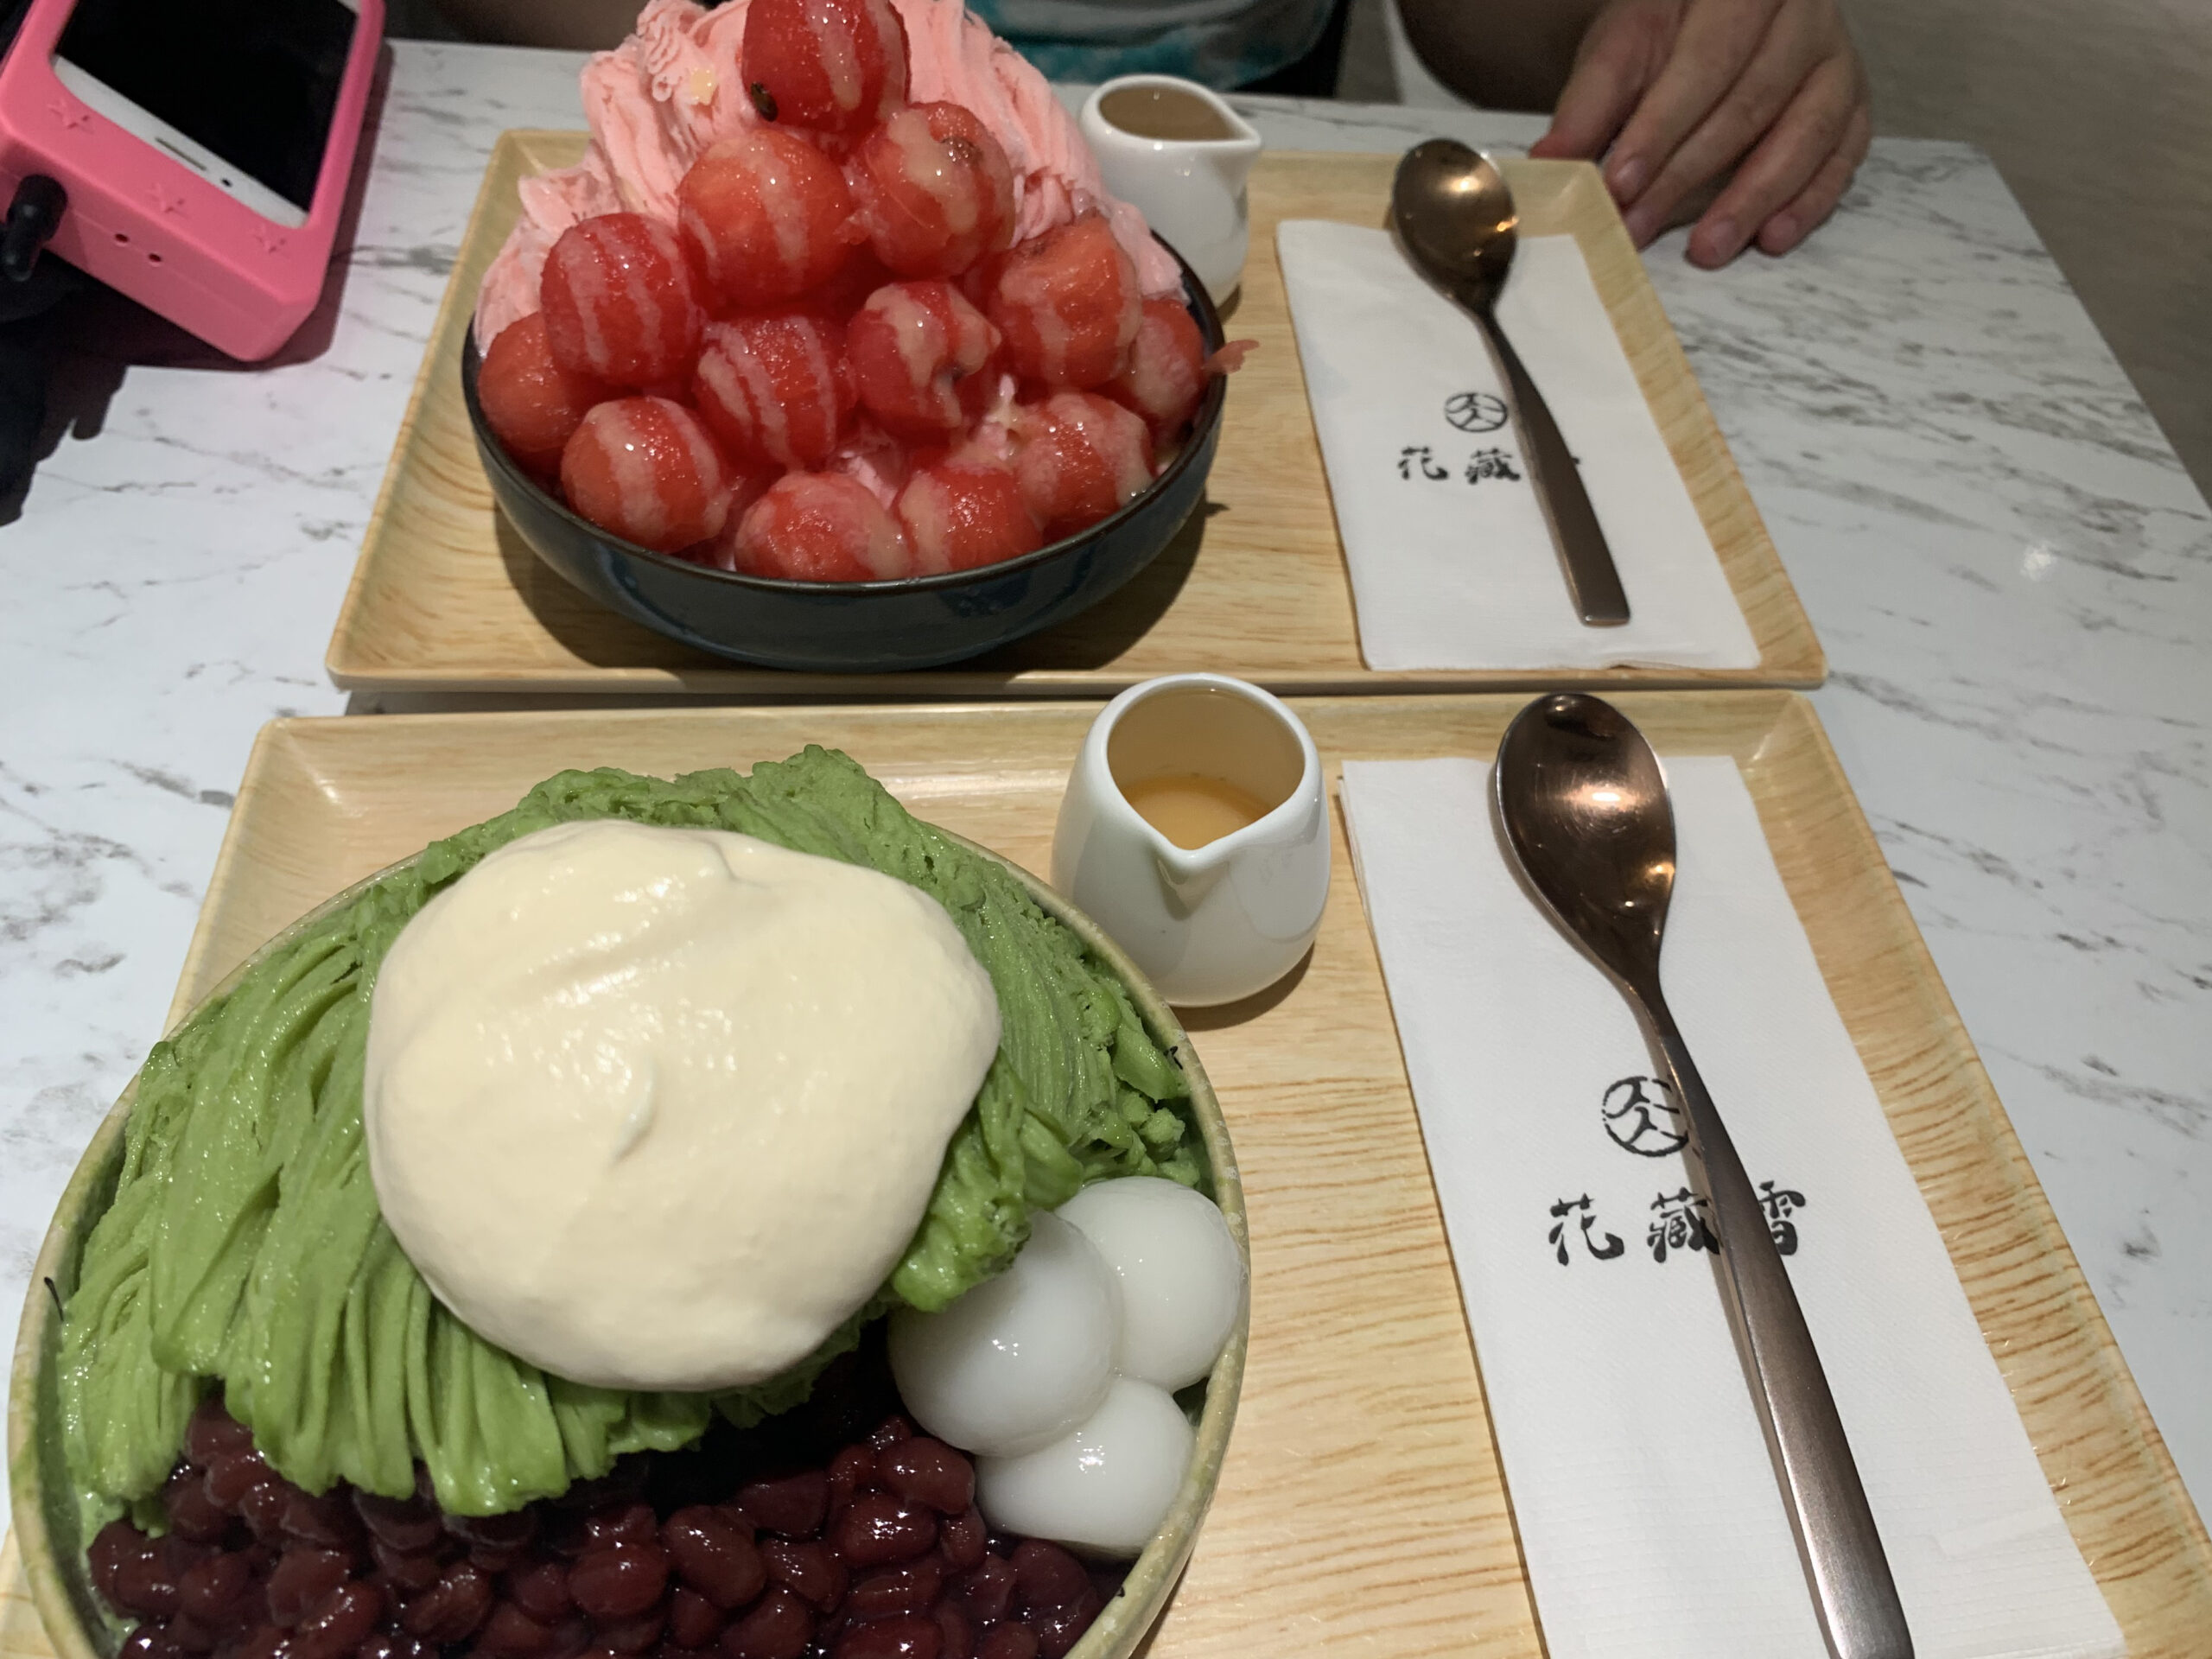 A photo taken by Caroline showing two plates of shaved ice dessert with Wheeler alum Naomi Blank's hand in the far right corner at the Shilin Night Market.